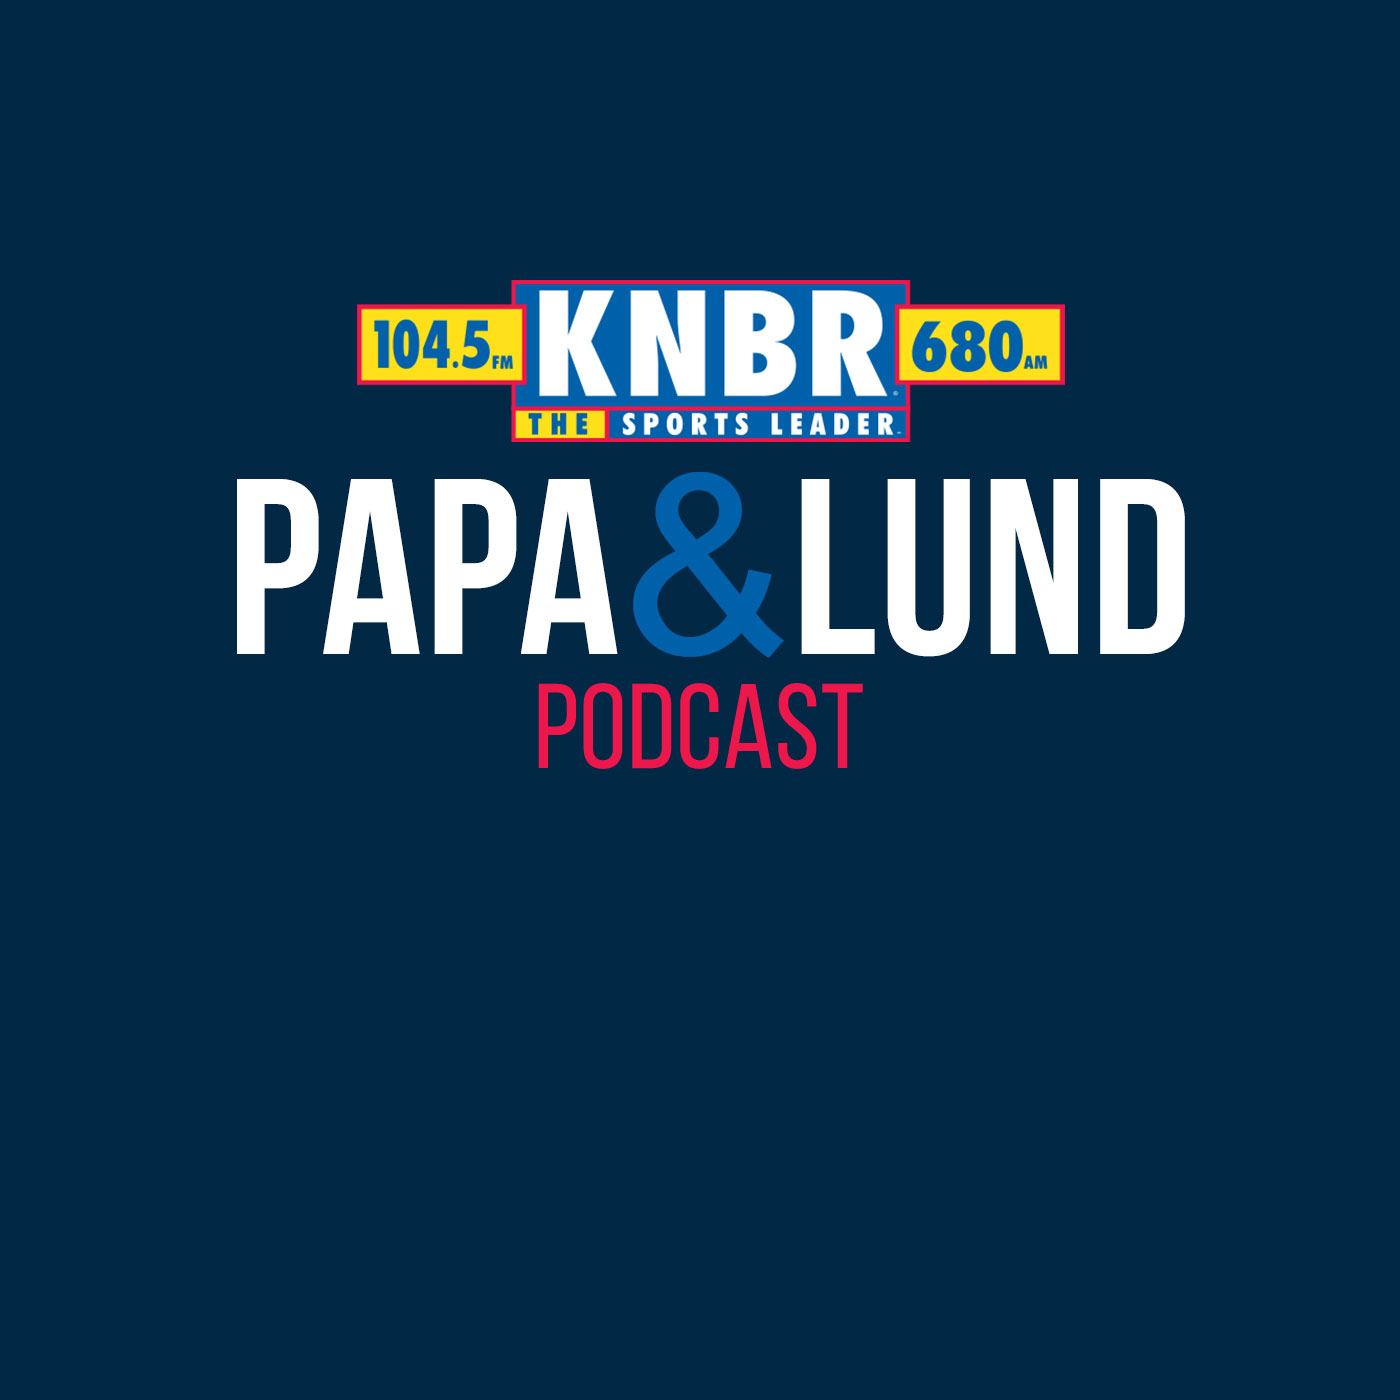 10-25 Mike Sando joins Papa & Lund to take a look at the biggest story lines in the NFL, including what the McCaffrey trade means for the 49ers and the rest of the NFL